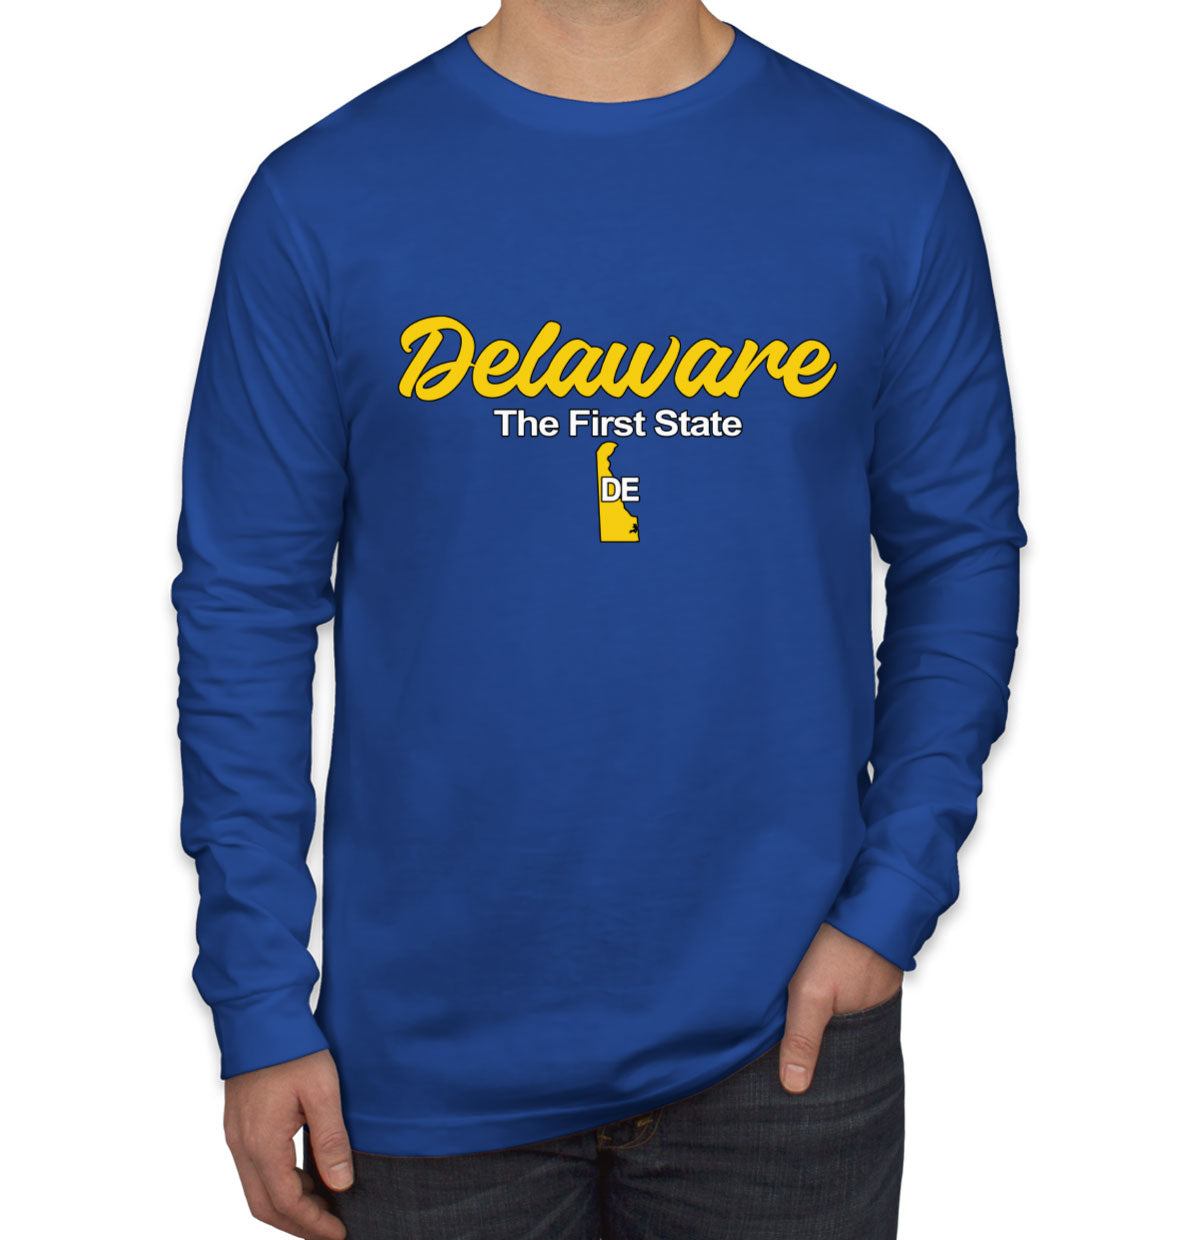 Delaware The First State Men's Long Sleeve Shirt